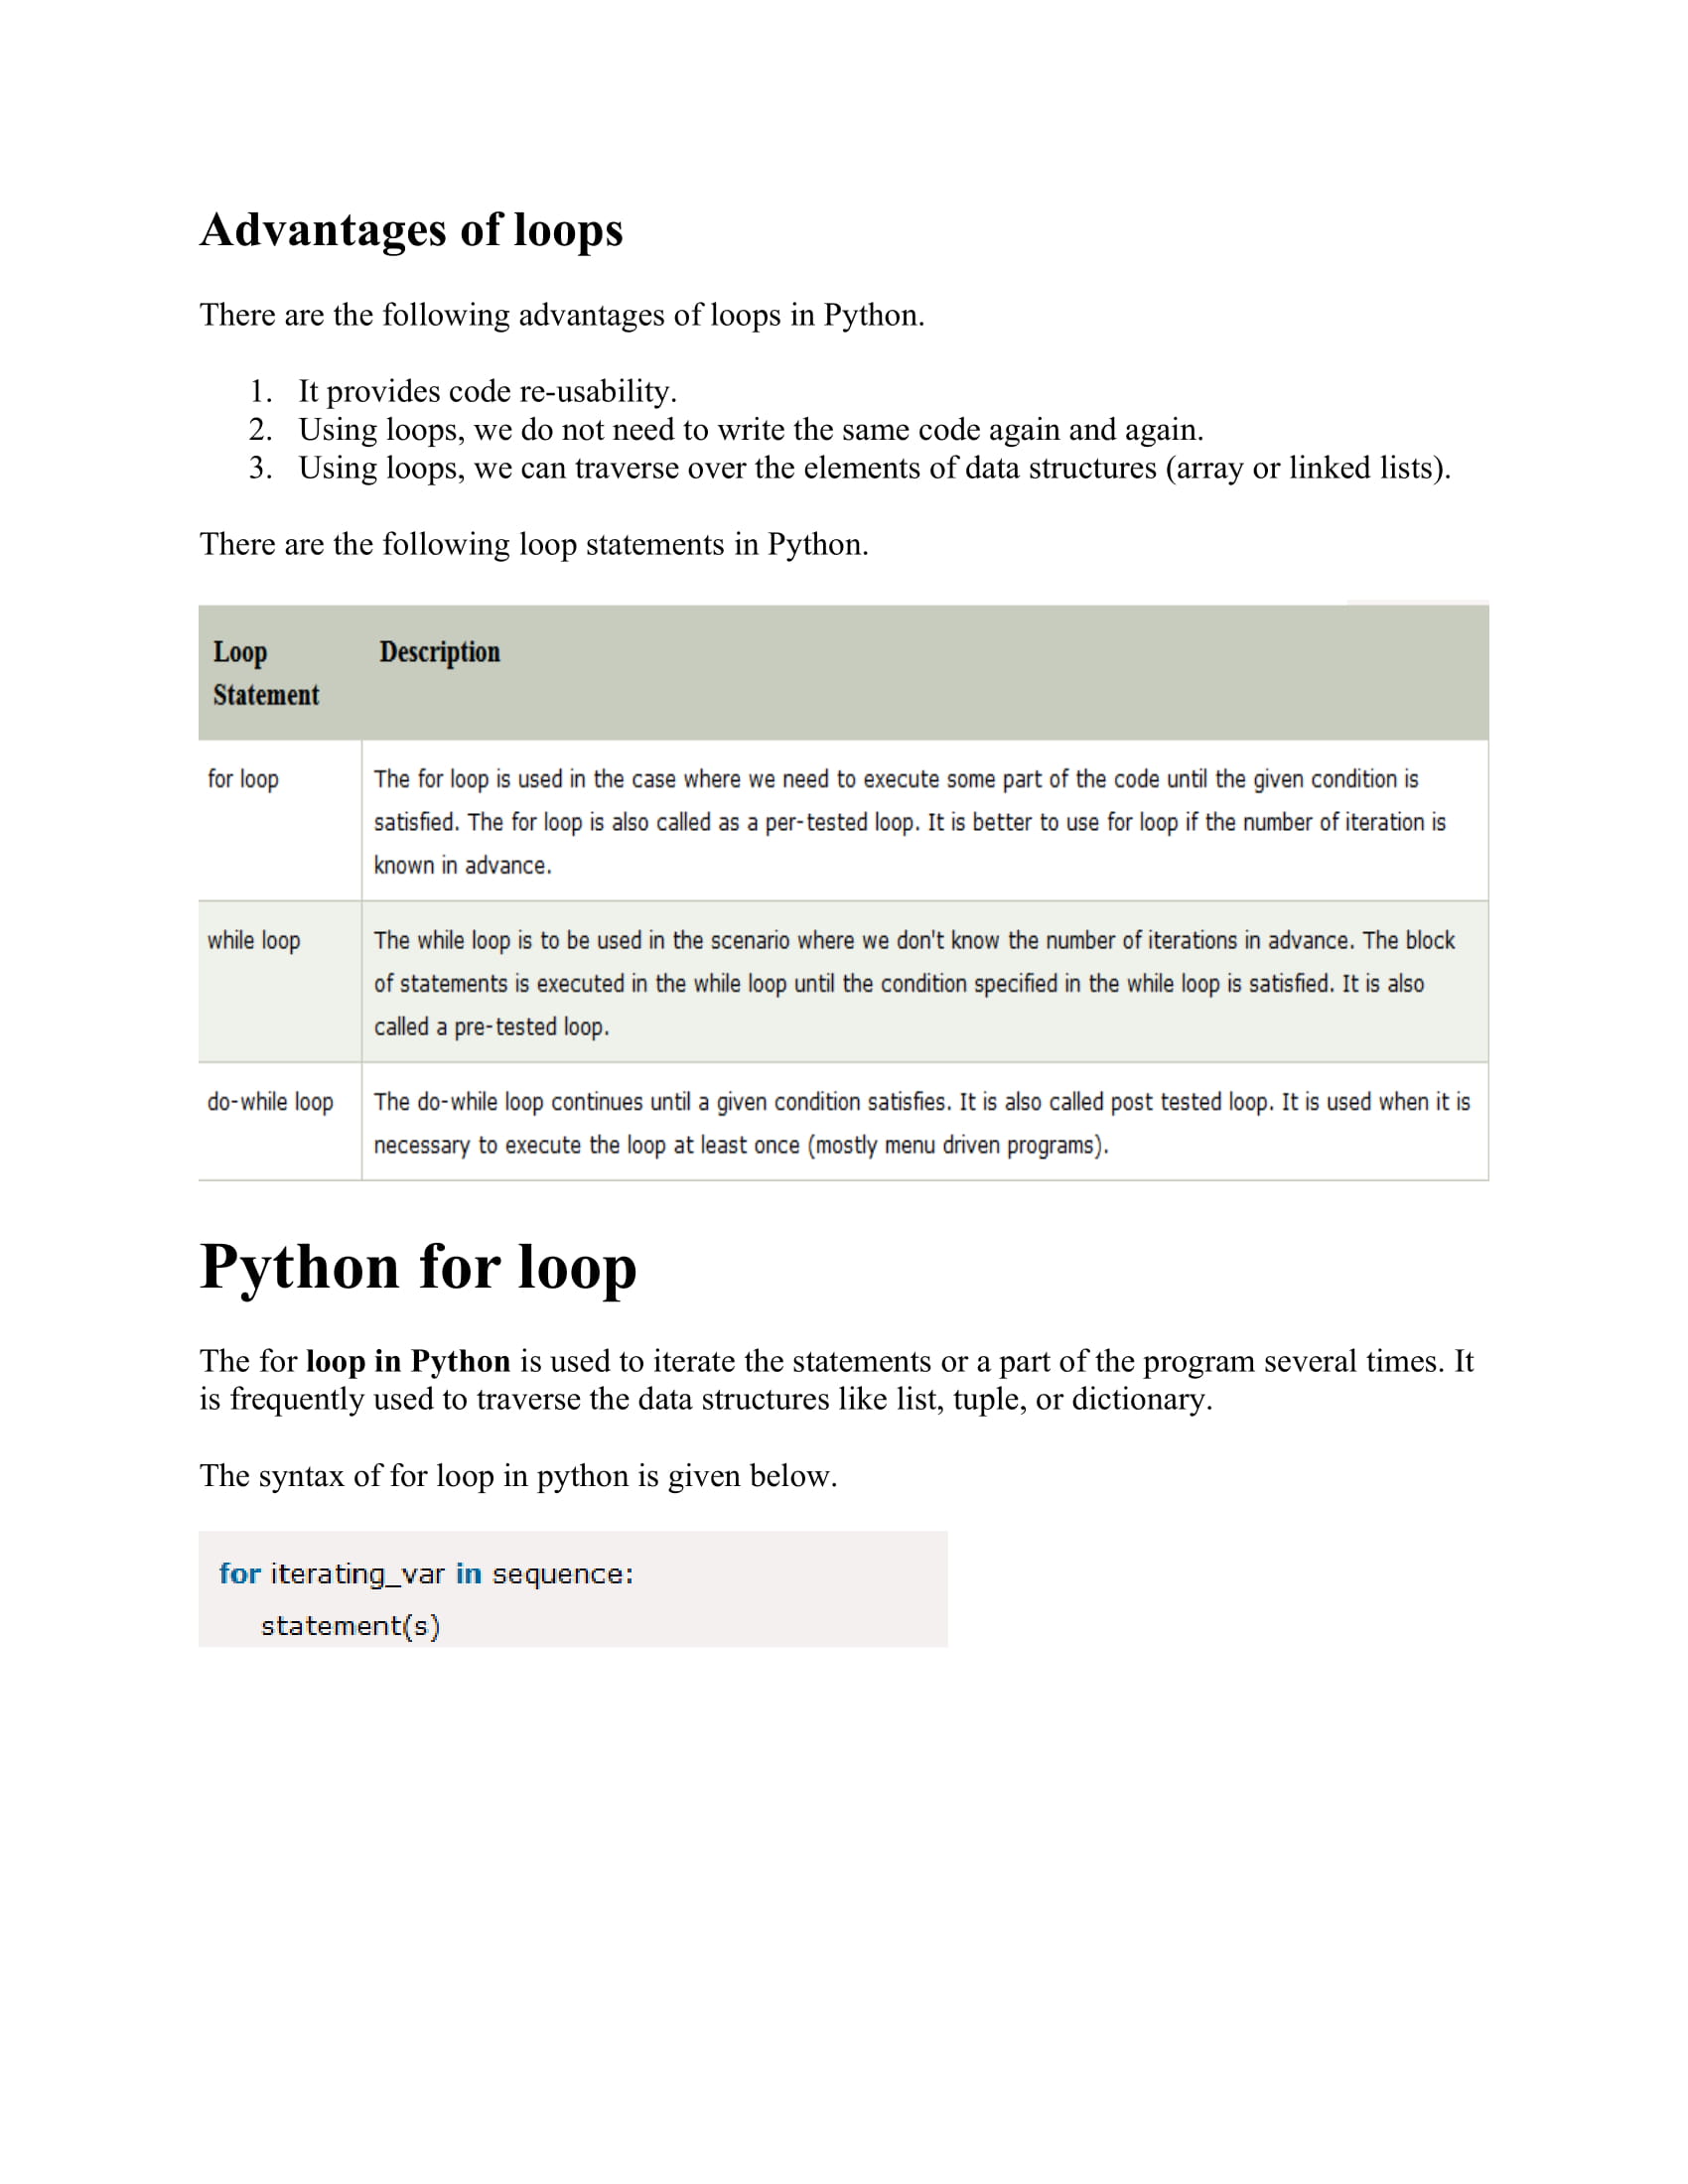 python start subprocess in background and quit